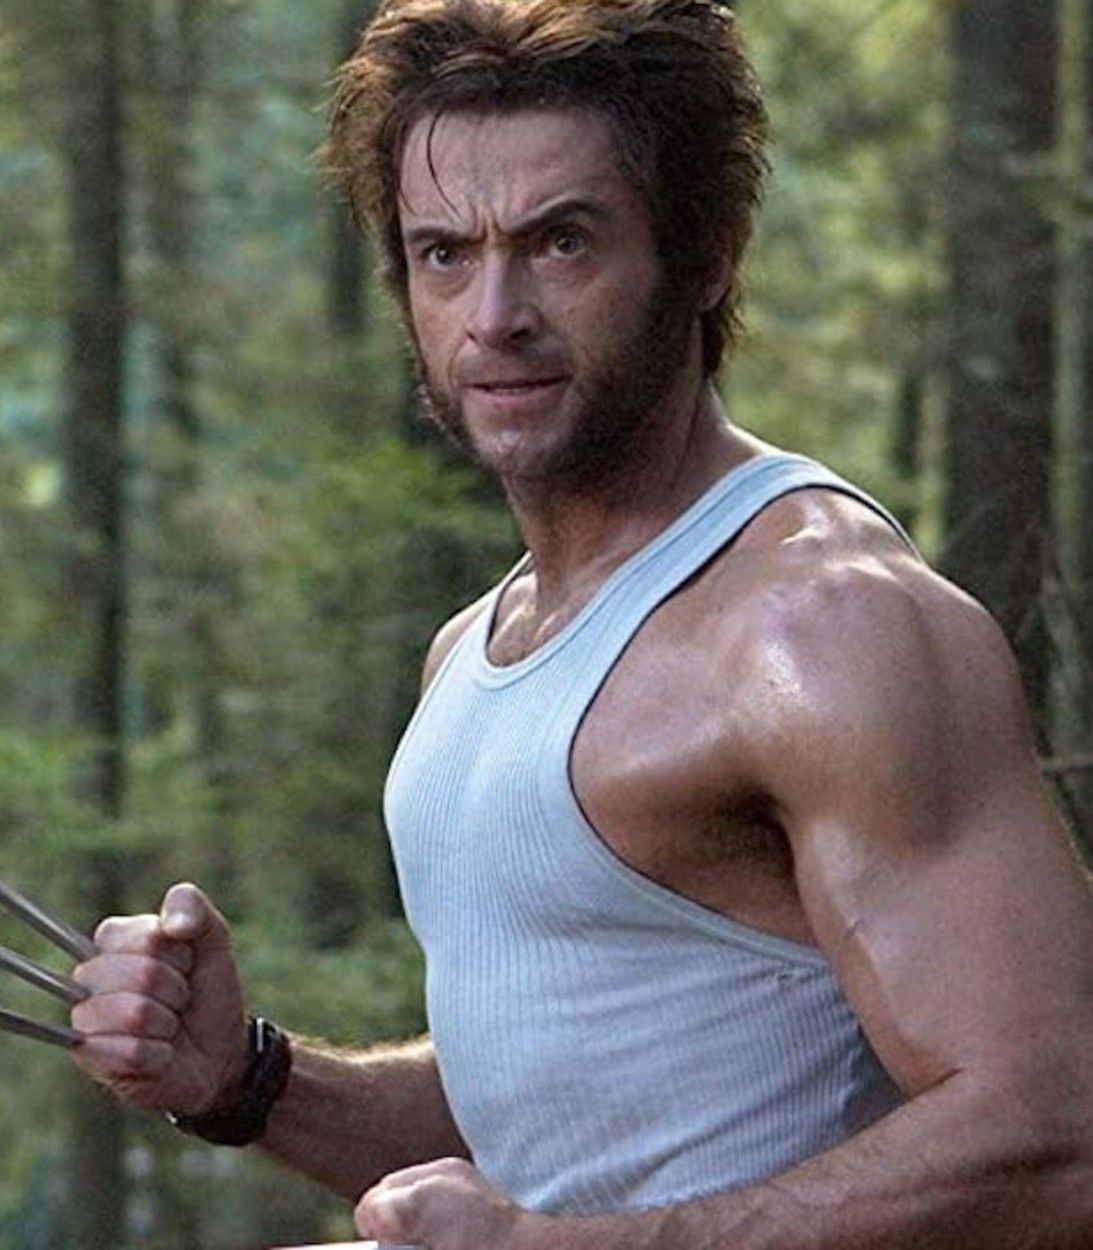 Wolverine in X-Men The Last Stand pic vertical